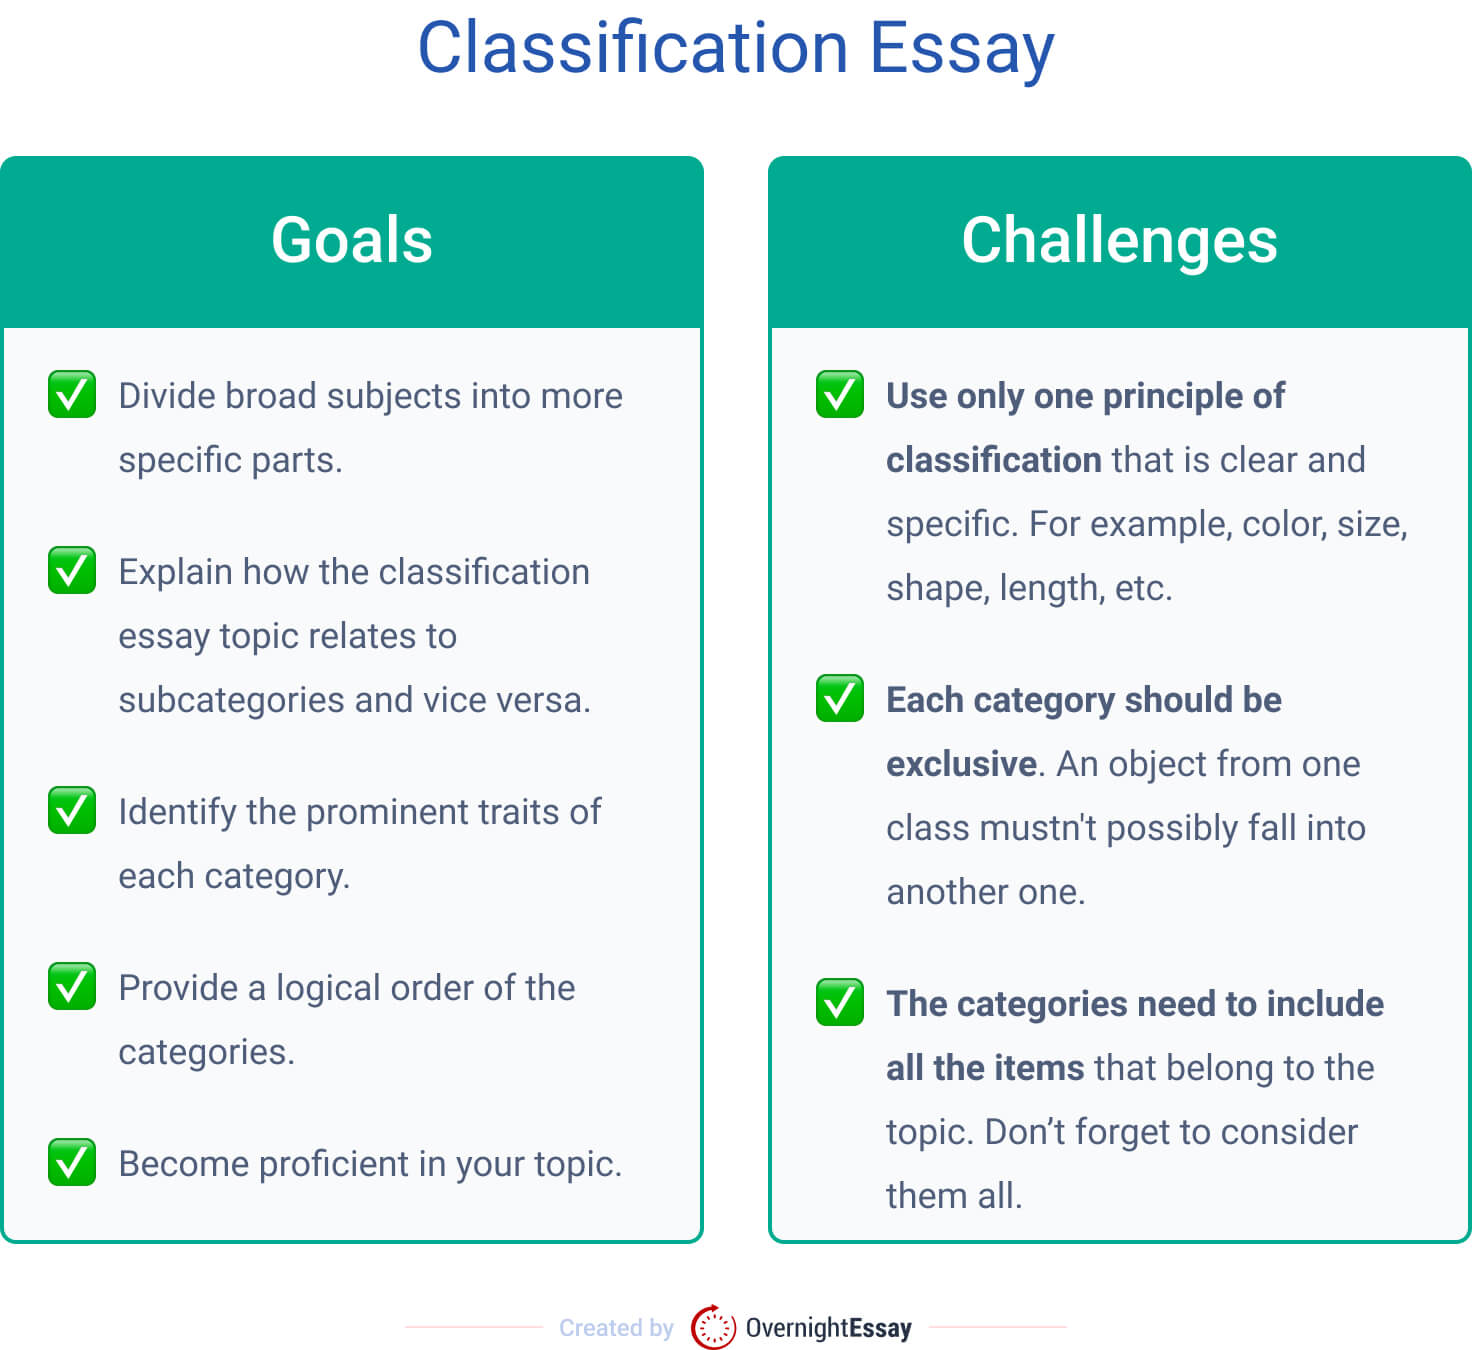 The picture provides information about goals and challenges of a classification essay.